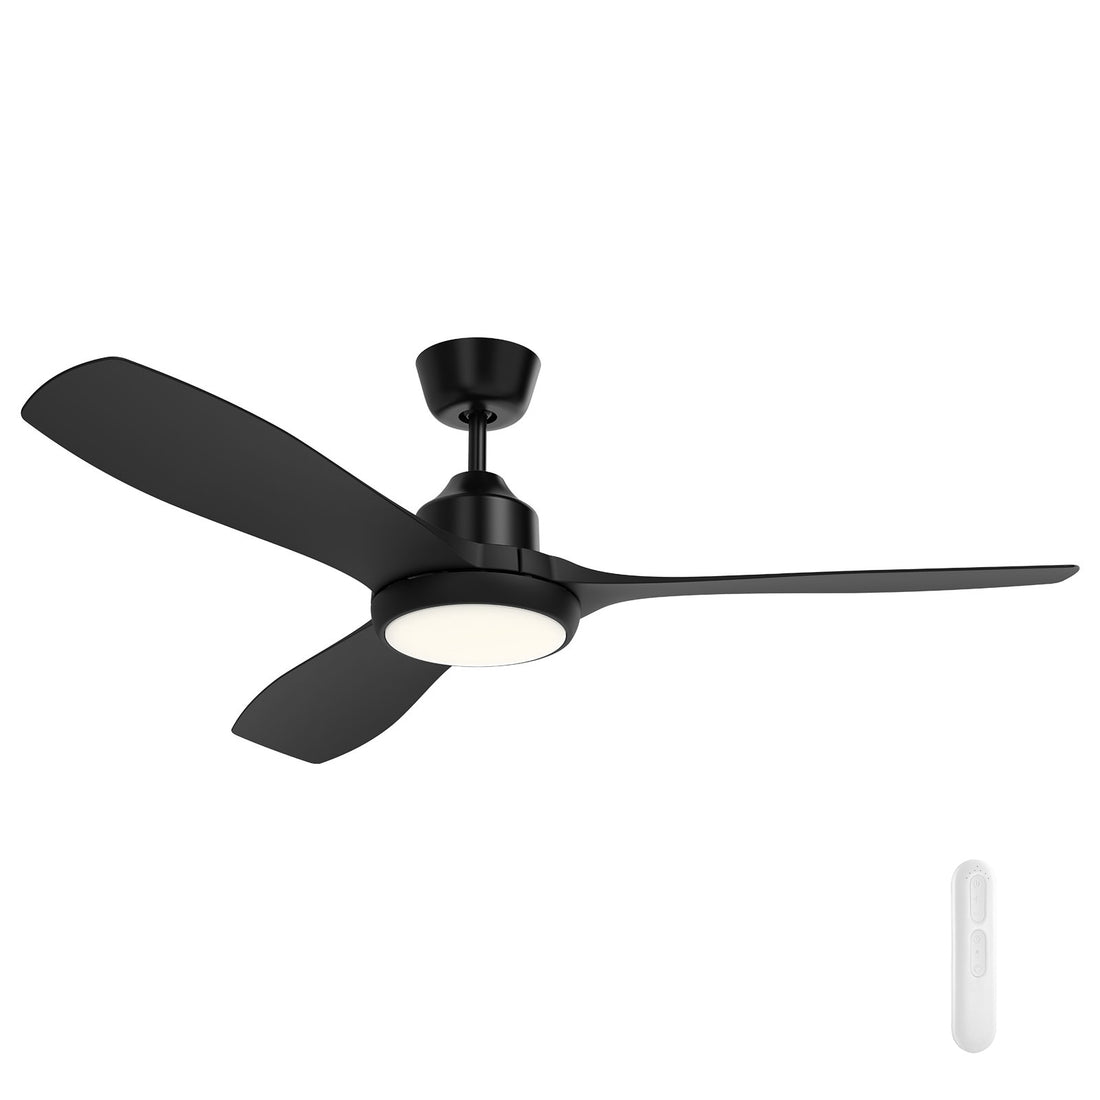 Raptor 131cm DC Ceiling Fan with Remote and LED Light